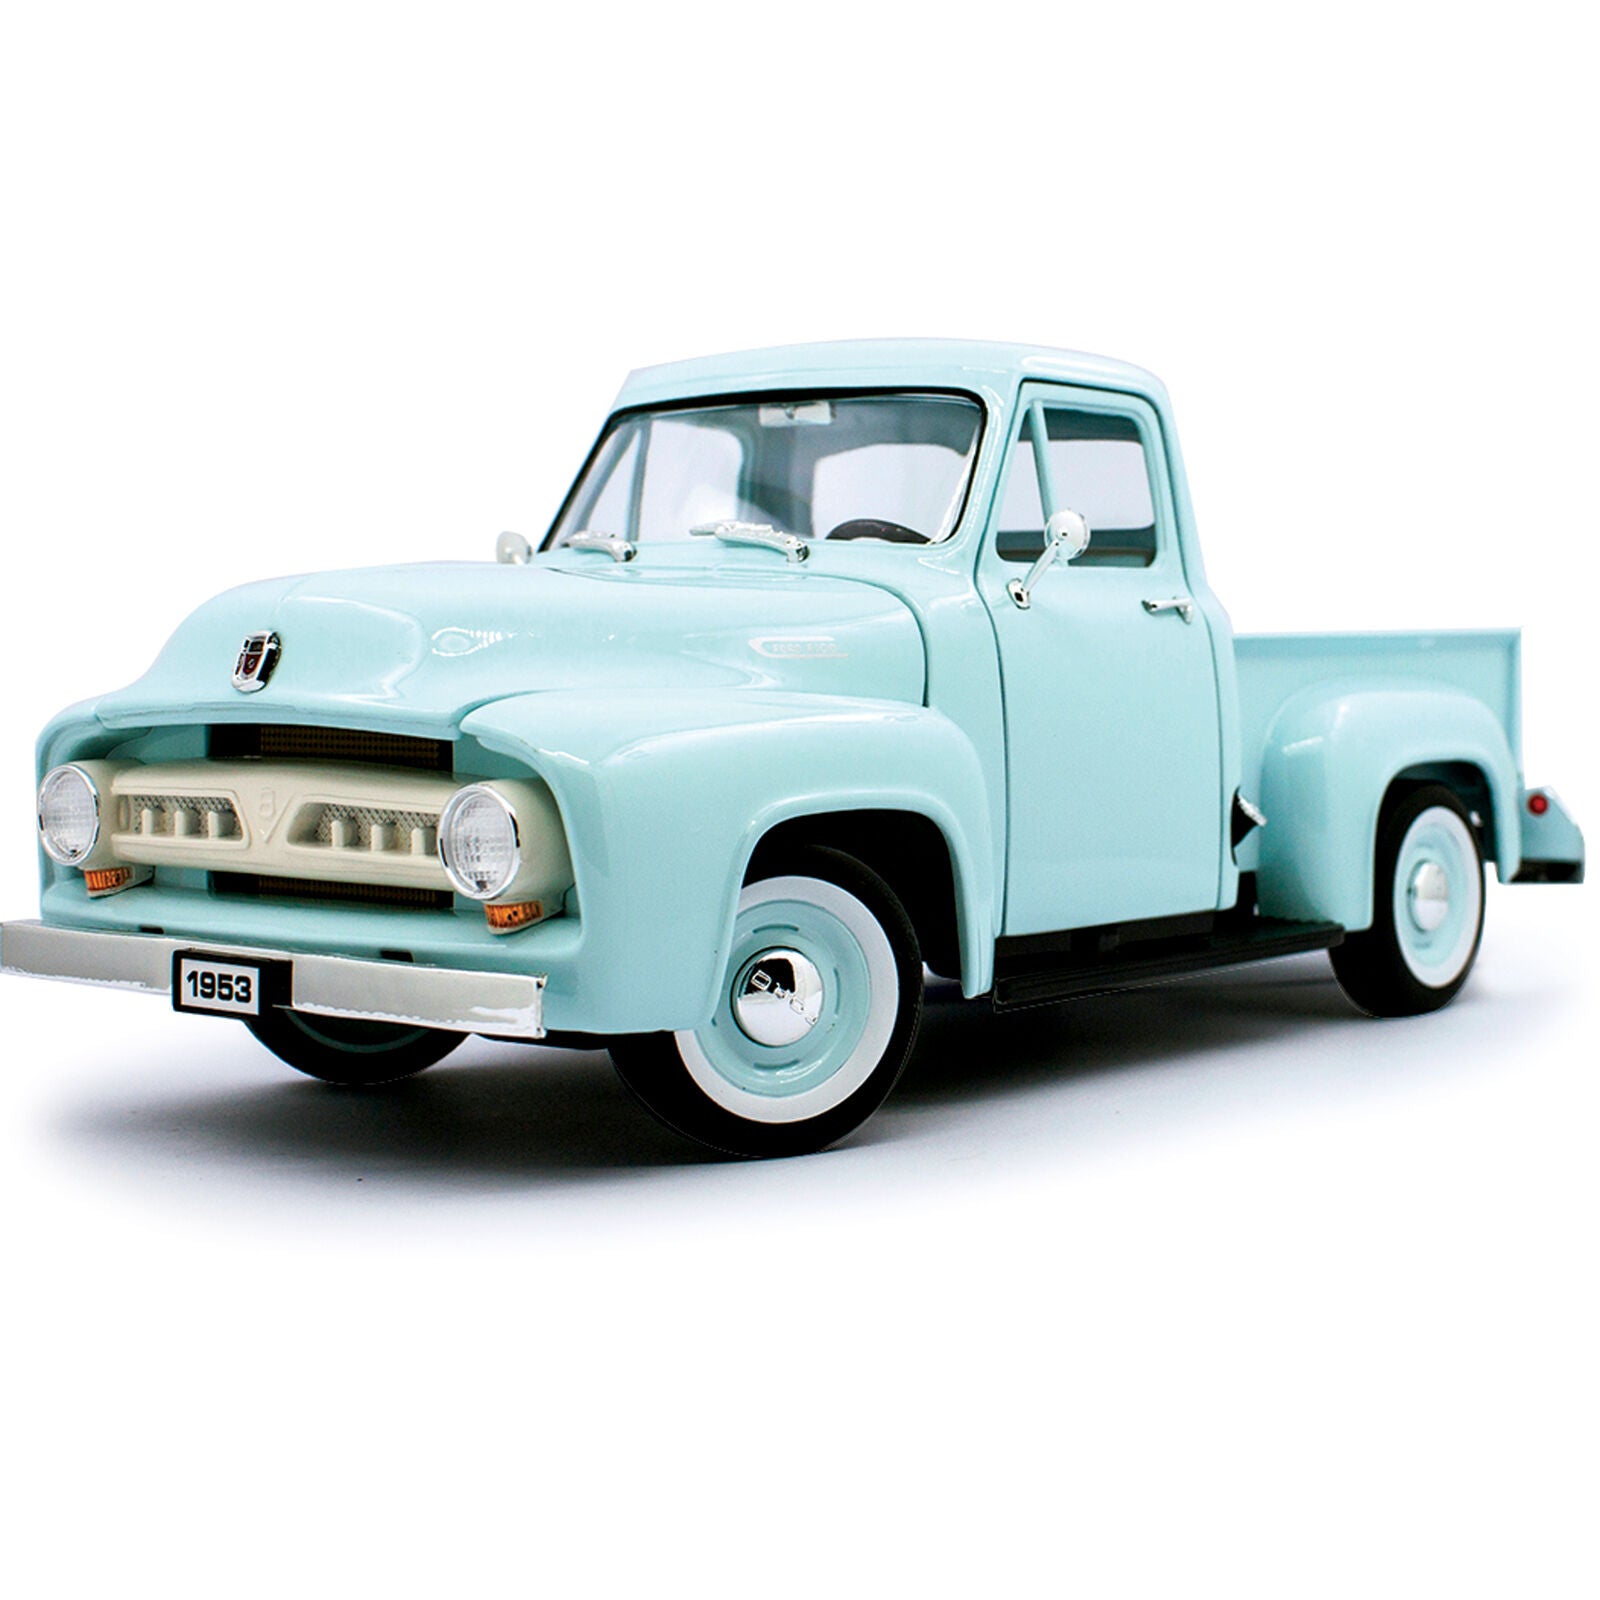 1953 Ford F-100 Pickup 1:18 Scale - Yatming Diecast Model Car (Green)